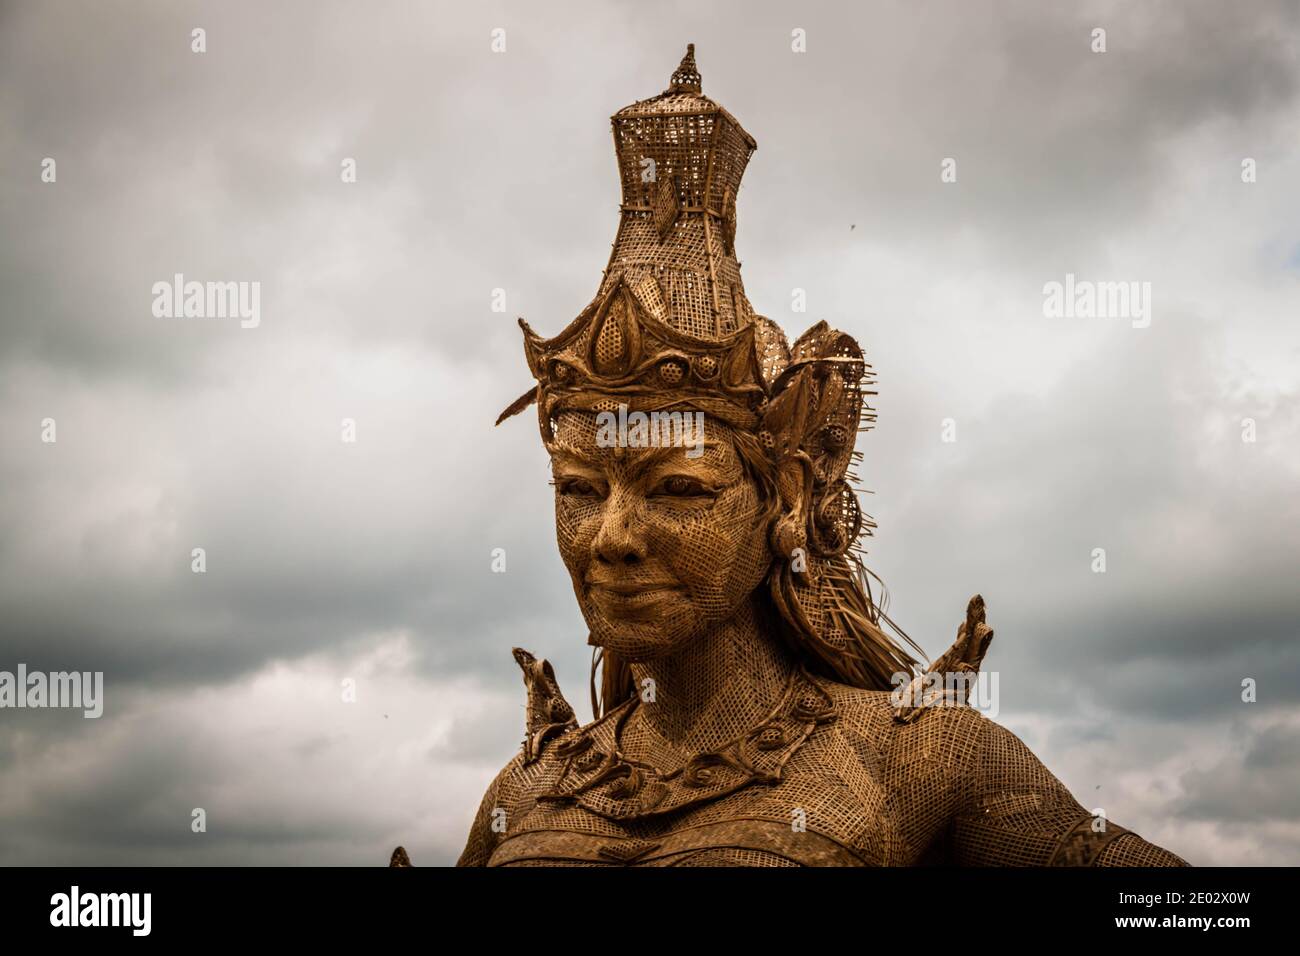 The statue of Dewi Sri, goddess of rice and fertility at Jatiluwih Rice Terrace in Bali Stock Photo